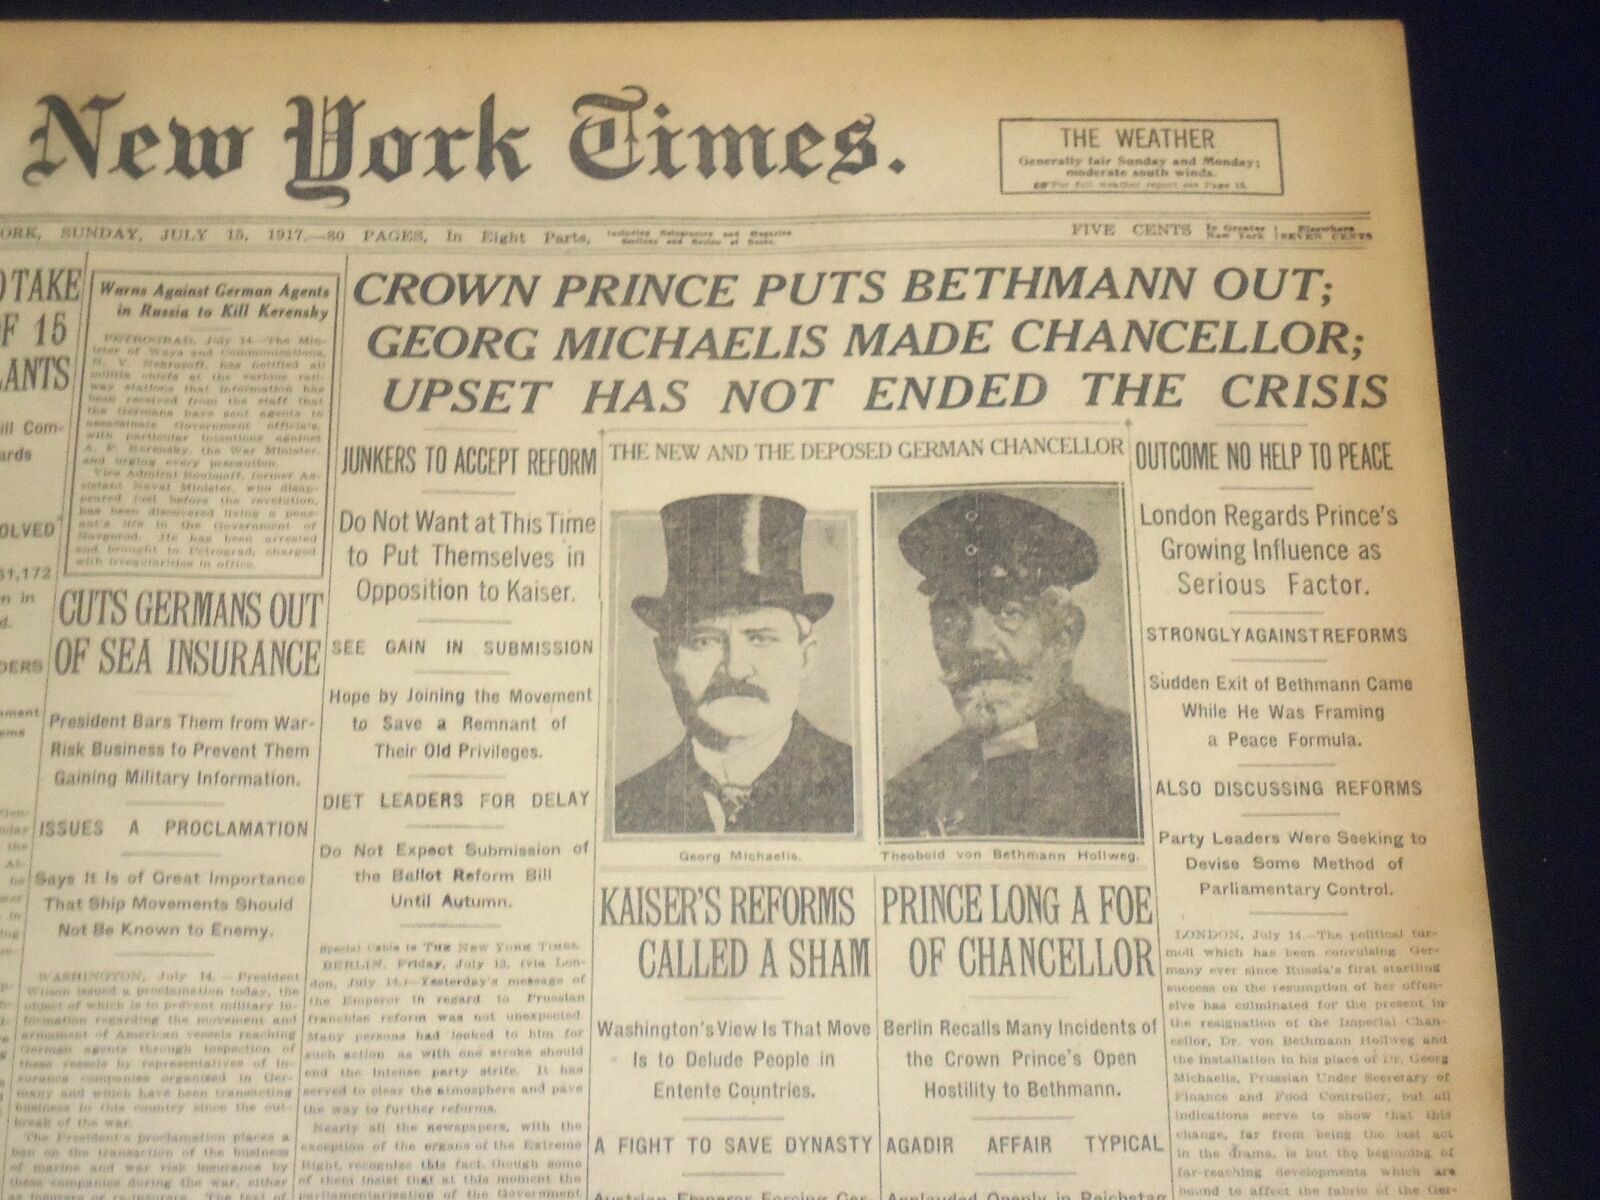 1917 JULY 15 NEW YORK TIMES - CROWN PRINCE PUTS BETHMANN OUT - NT 9304